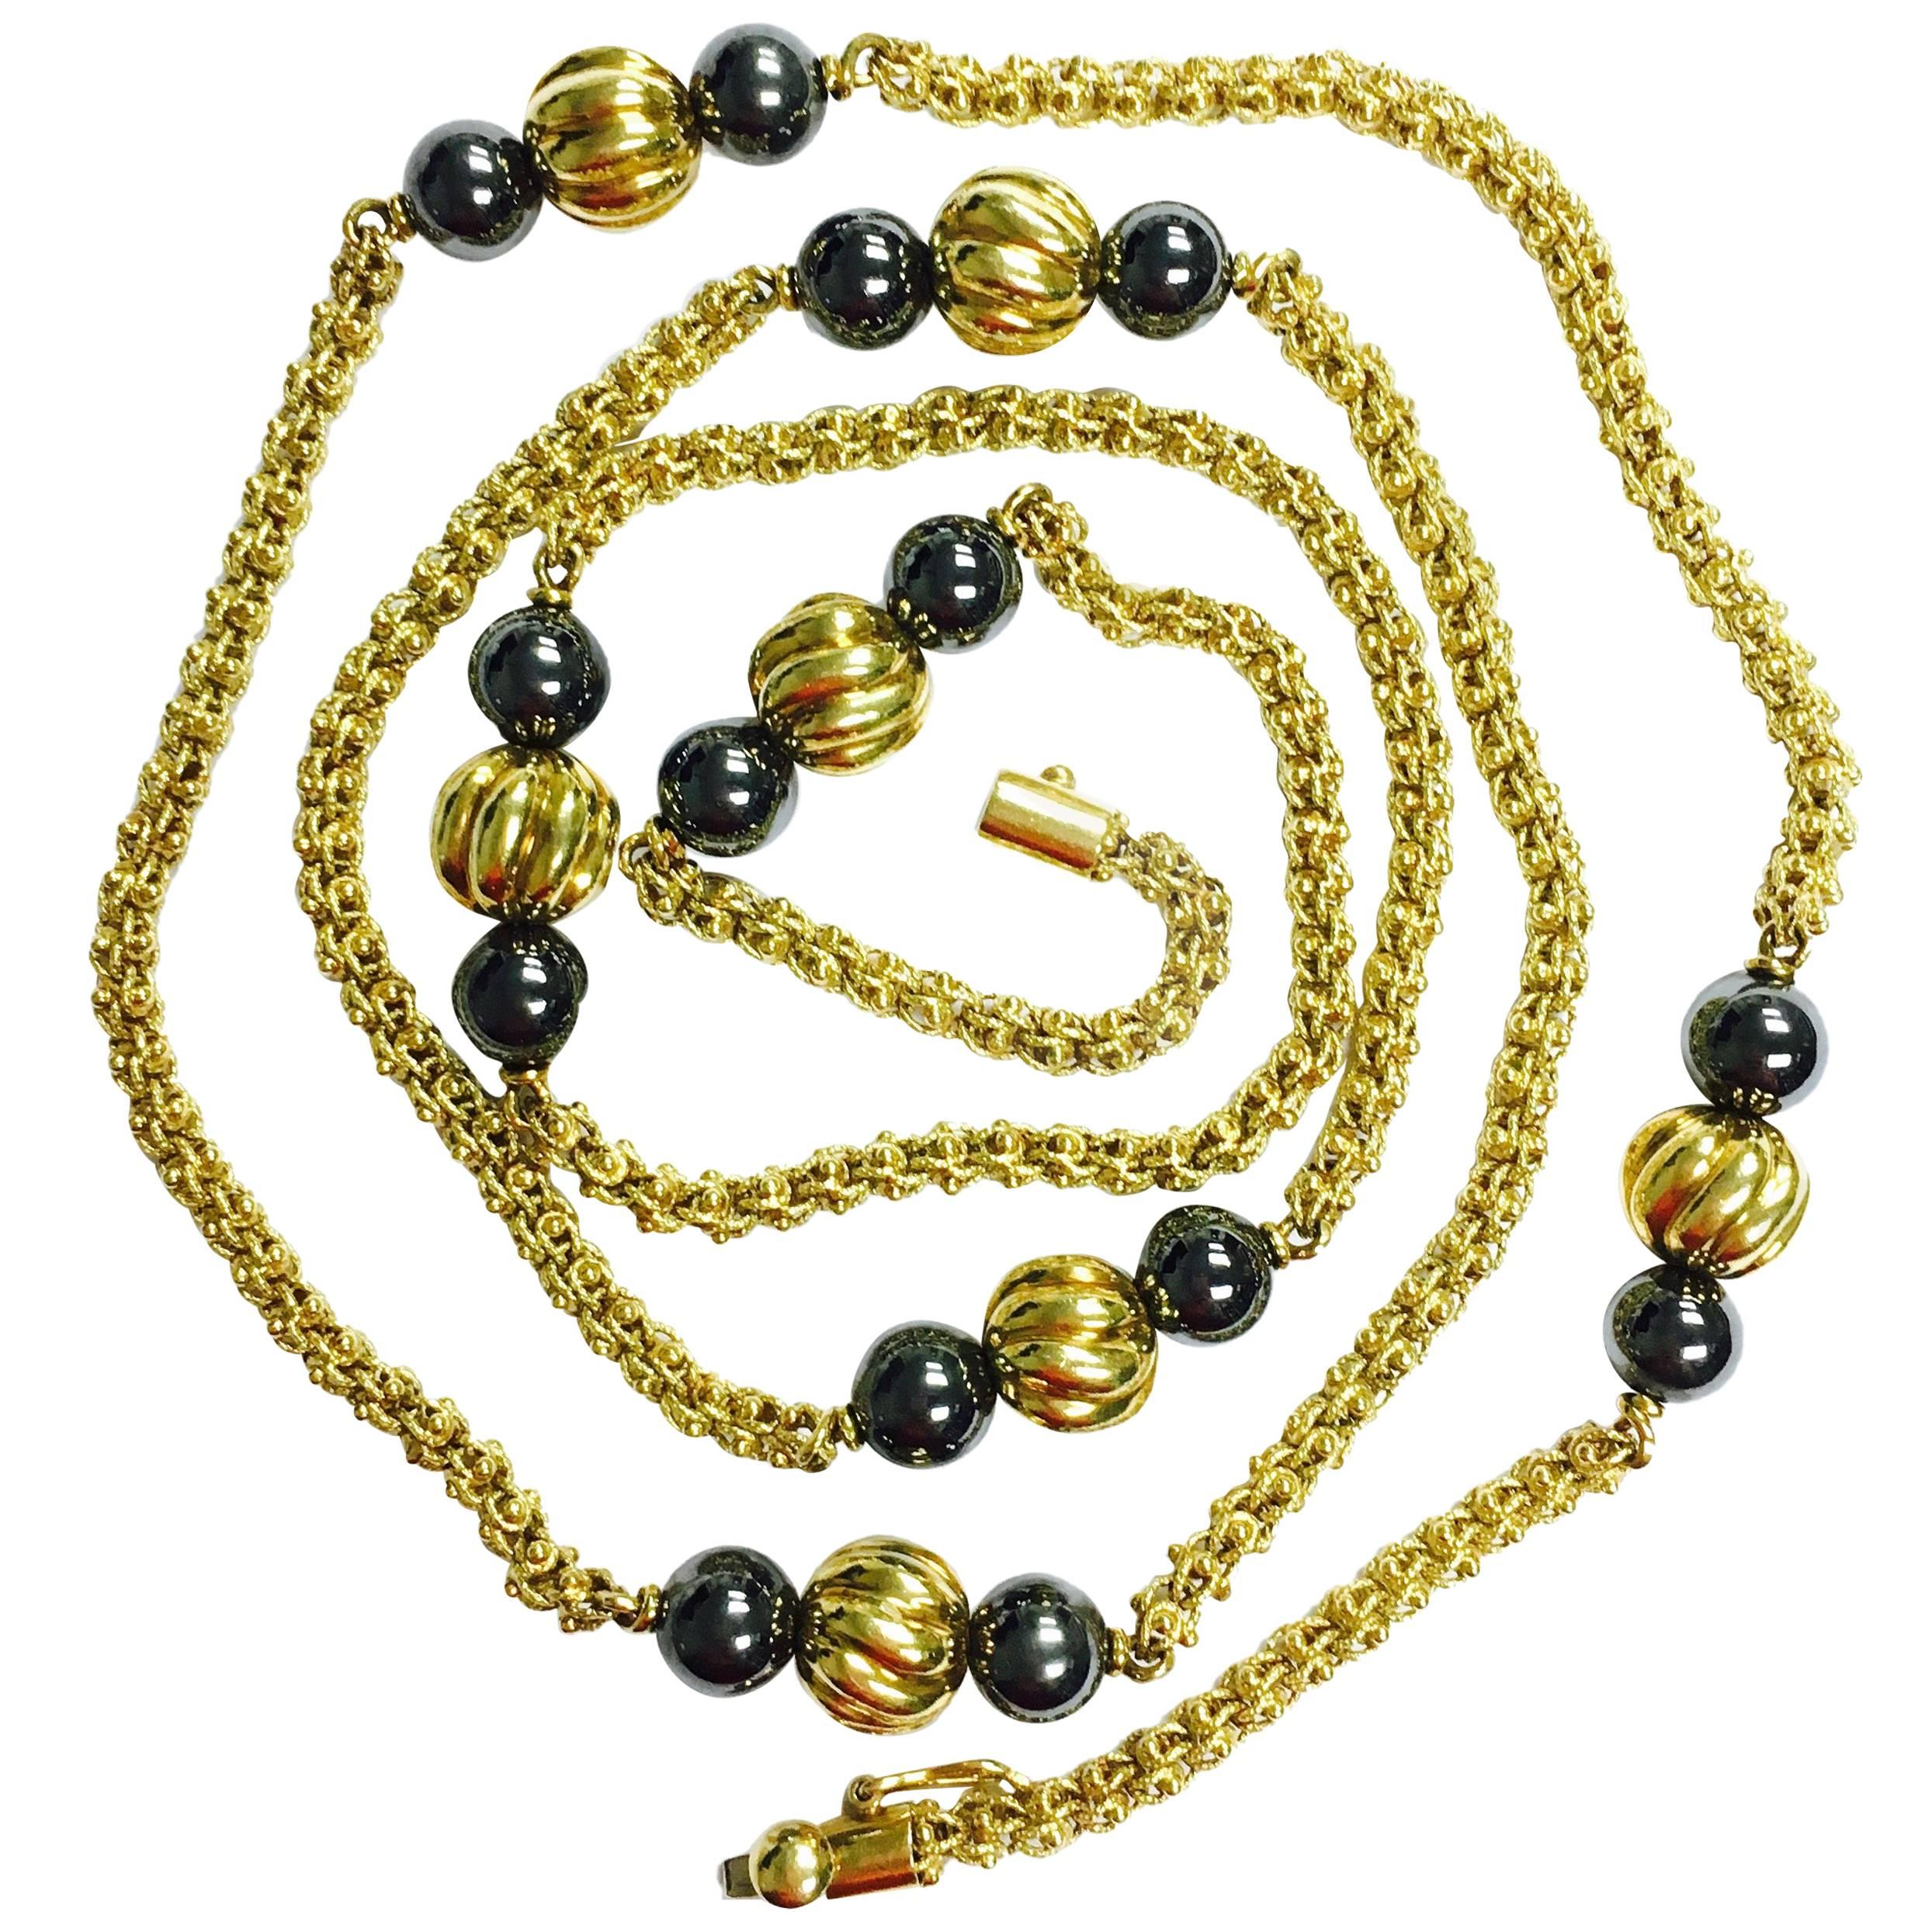 Vintage Hematite and Yellow Gold Beaded Long Chain Necklace